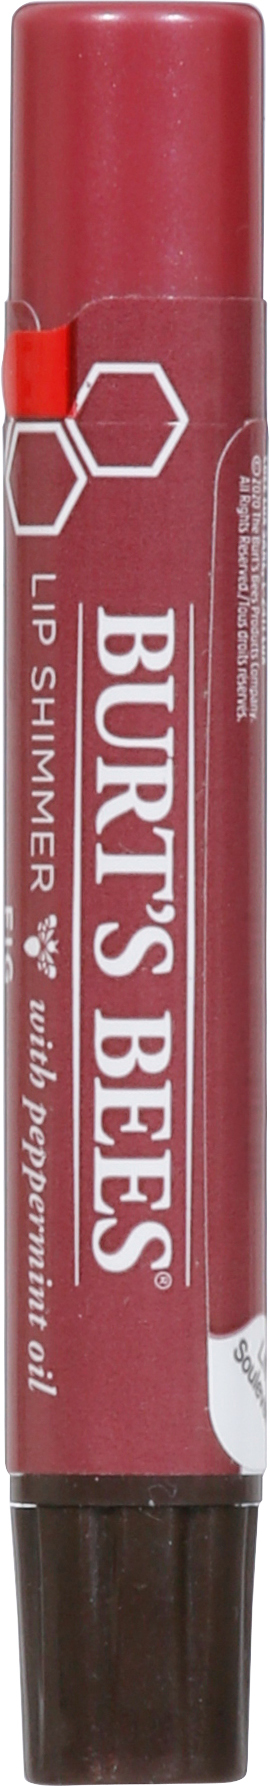 Burt's Bees Fig Lip Shimmer With Peppermint Oil